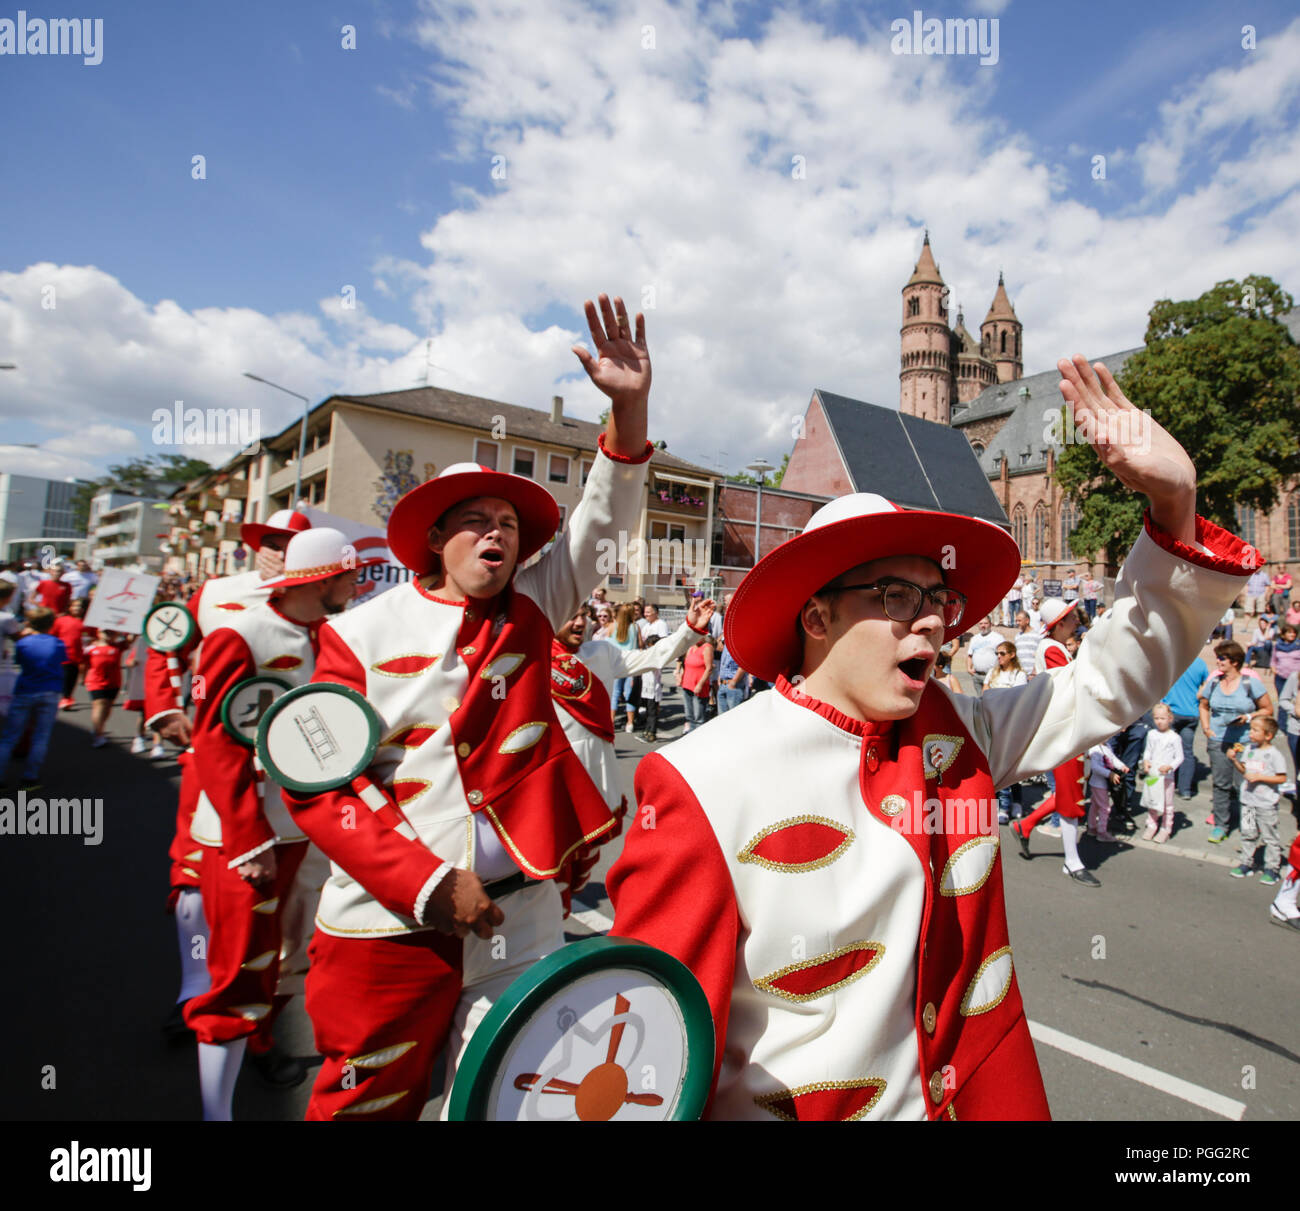 Worms, Germany. 26th August 2018. Journeymen march in the parade in traditional costume. The first highlight of the 2018 Backfischfest was the big parade through the city of Worms with over 70 groups and floats. Community groups, music groups and businesses from Worms and further afield took part. Credit: Michael Debets/Alamy Live News Stock Photo